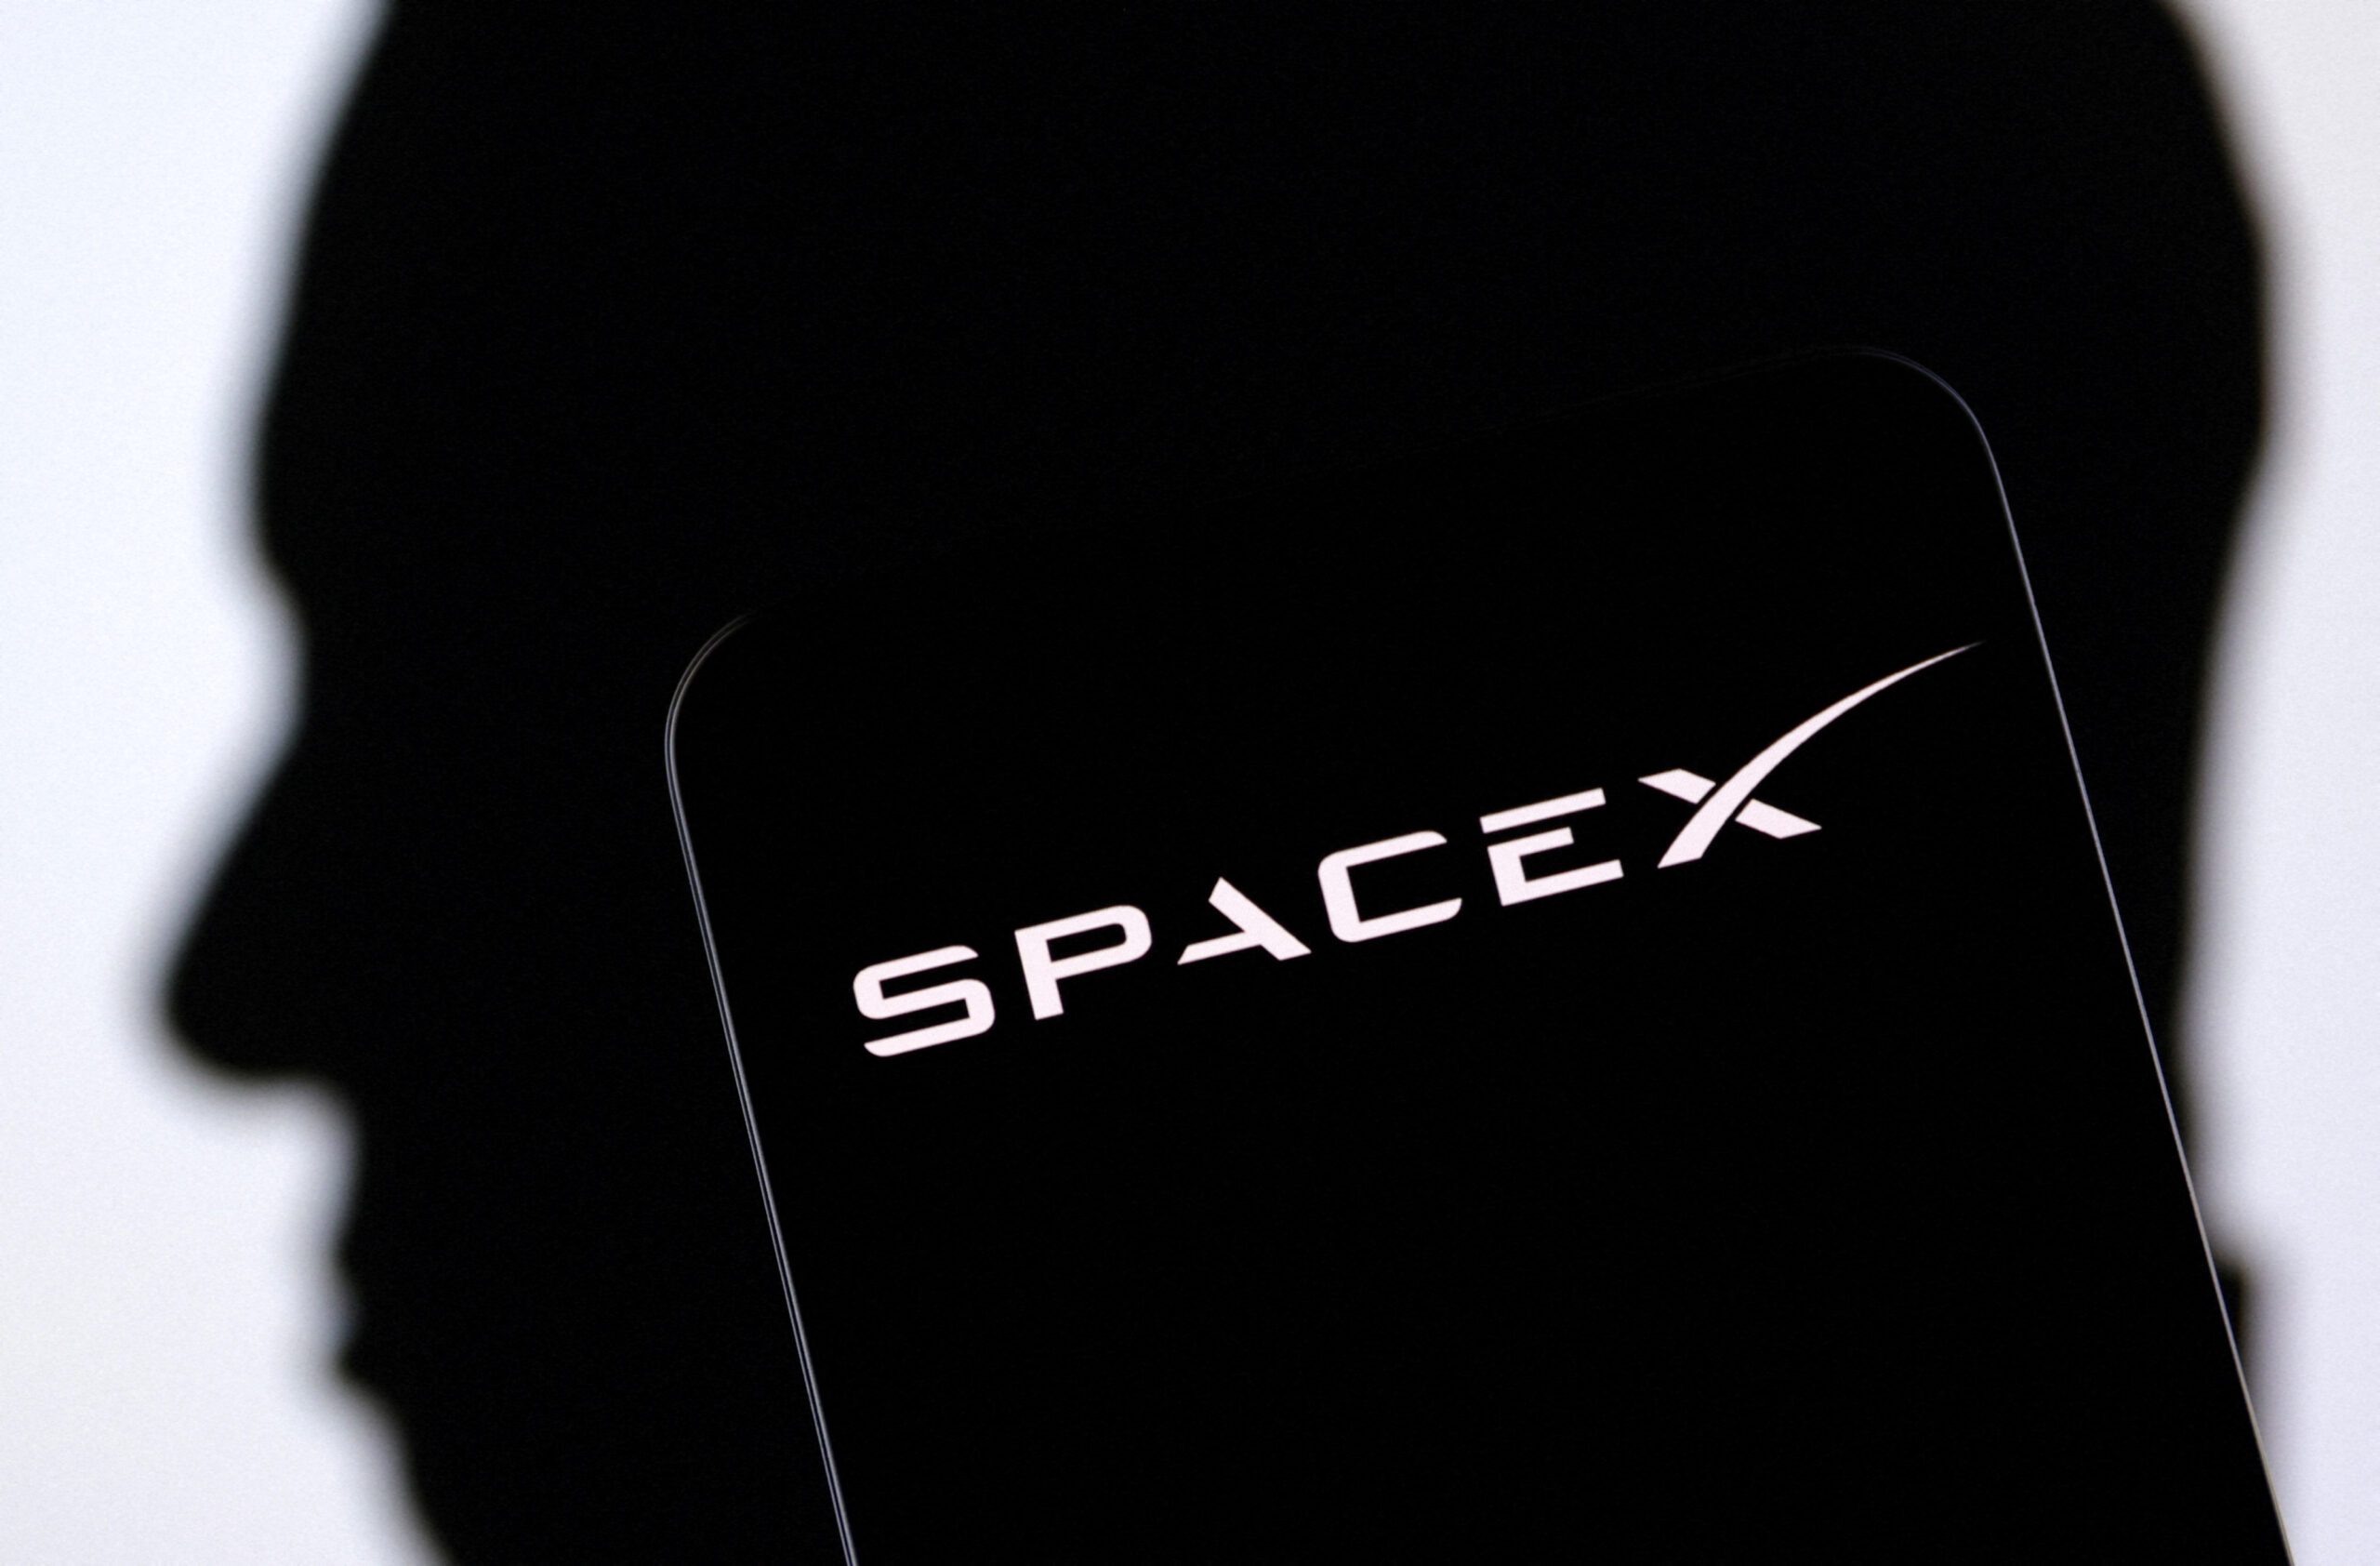 SpaceX unit Starlink secures Indonesia operating permit